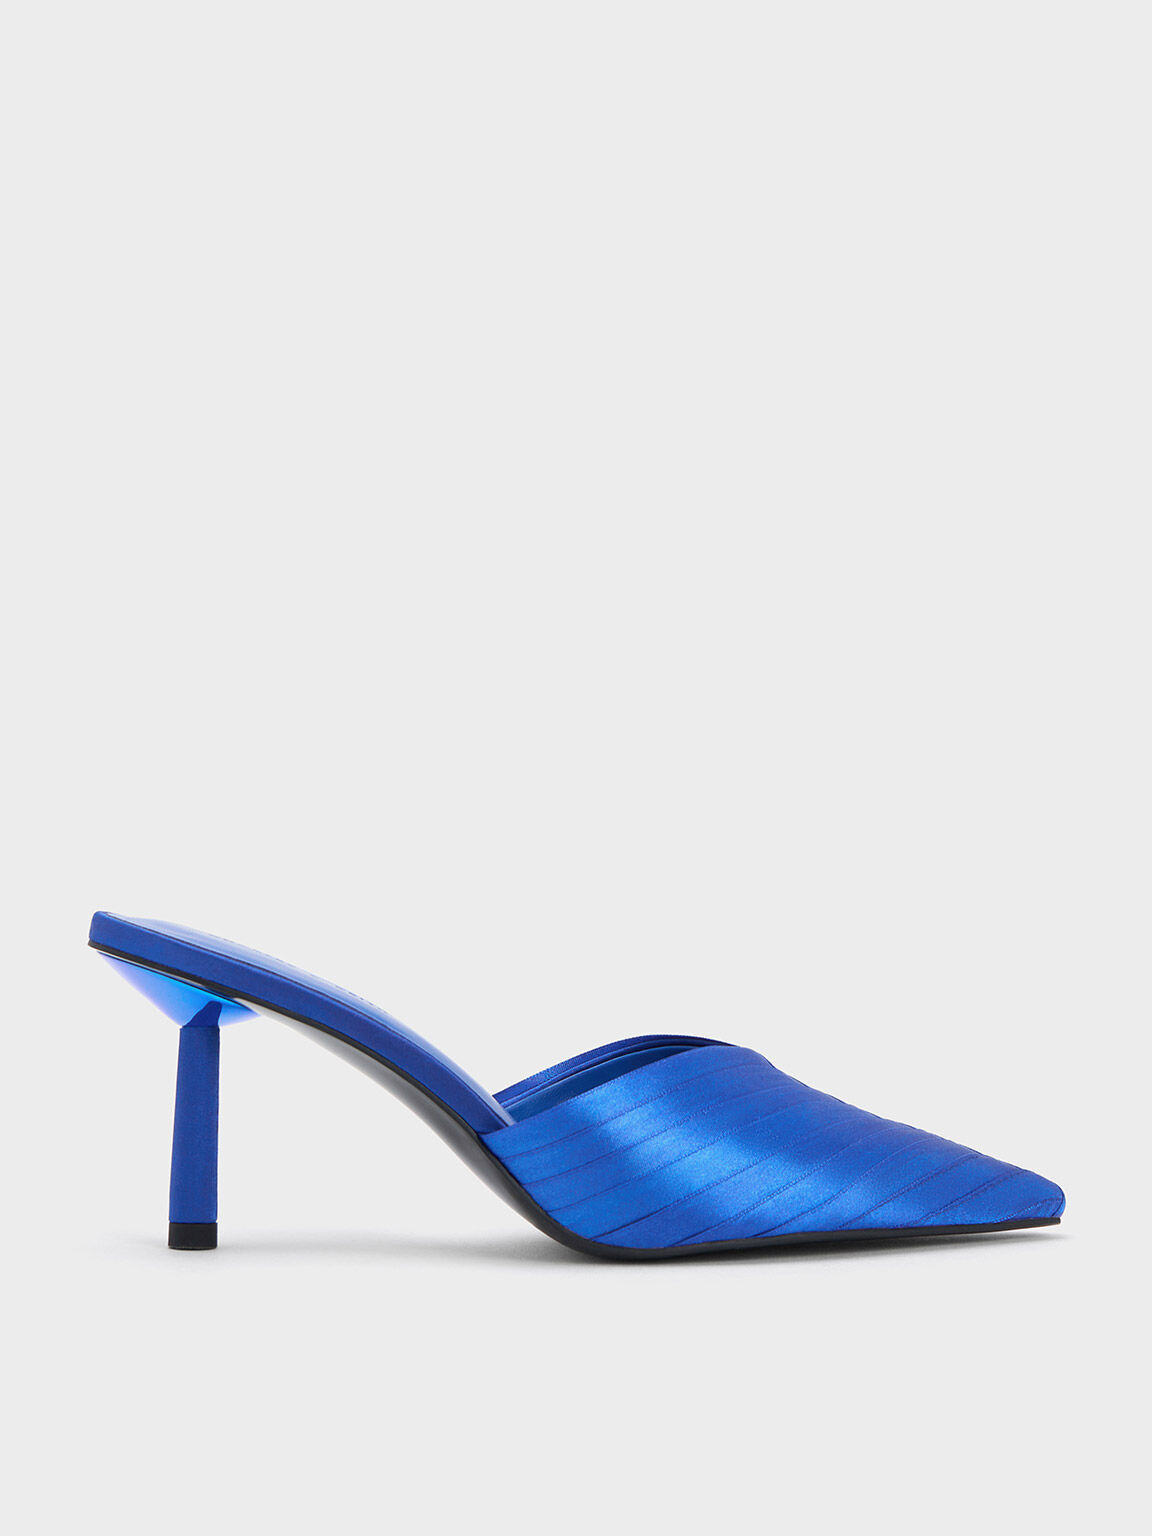 Recycled Polyester Cylindrical Heel Mules, Blue, hi-res